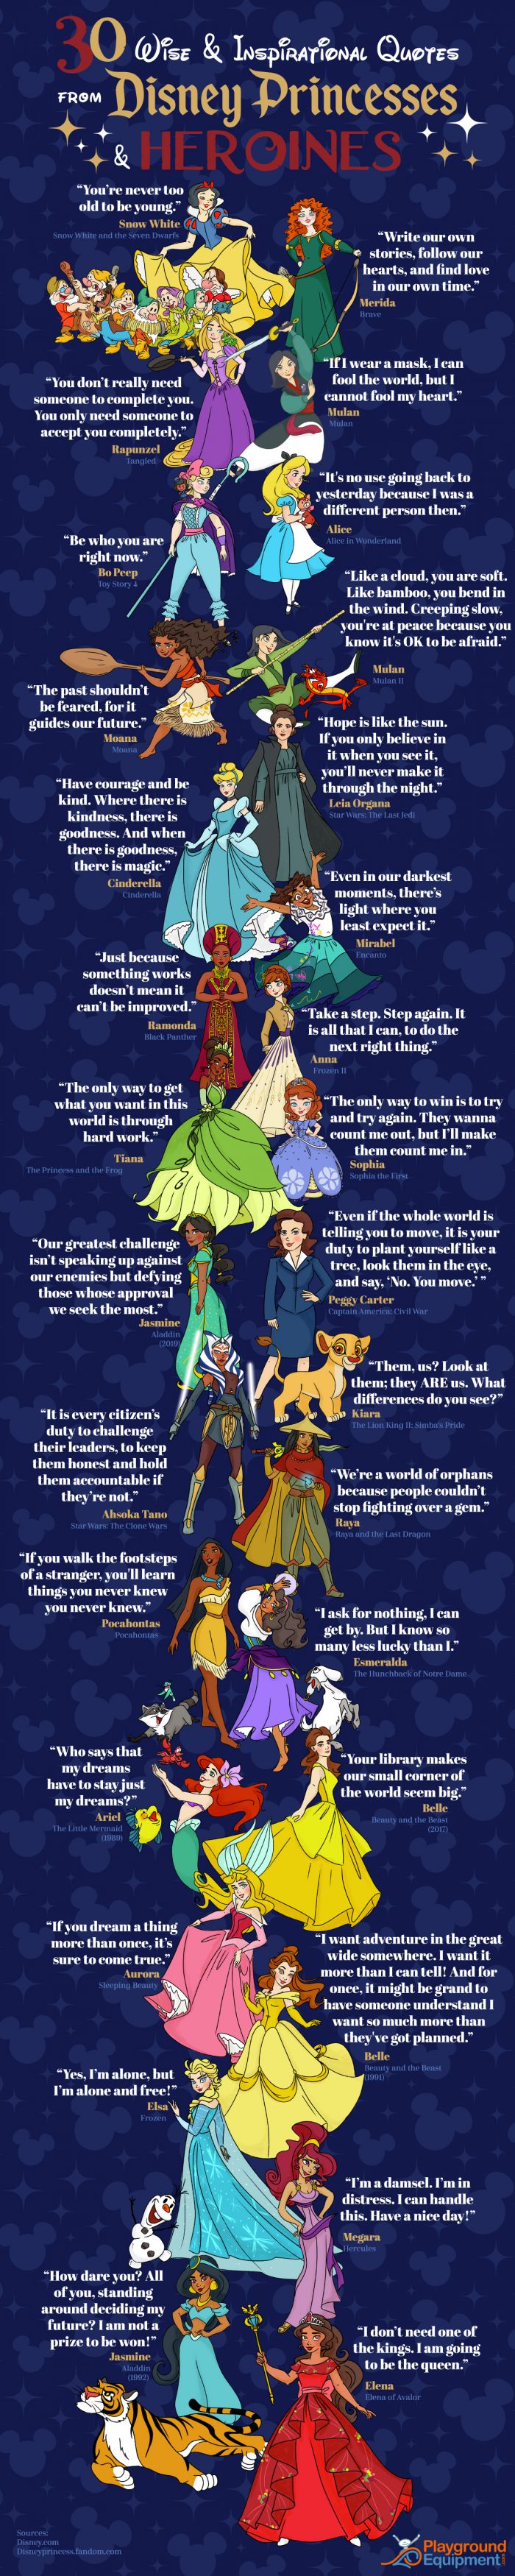 Wise & Inspirational Quotes from Disney Princesses and Heroines